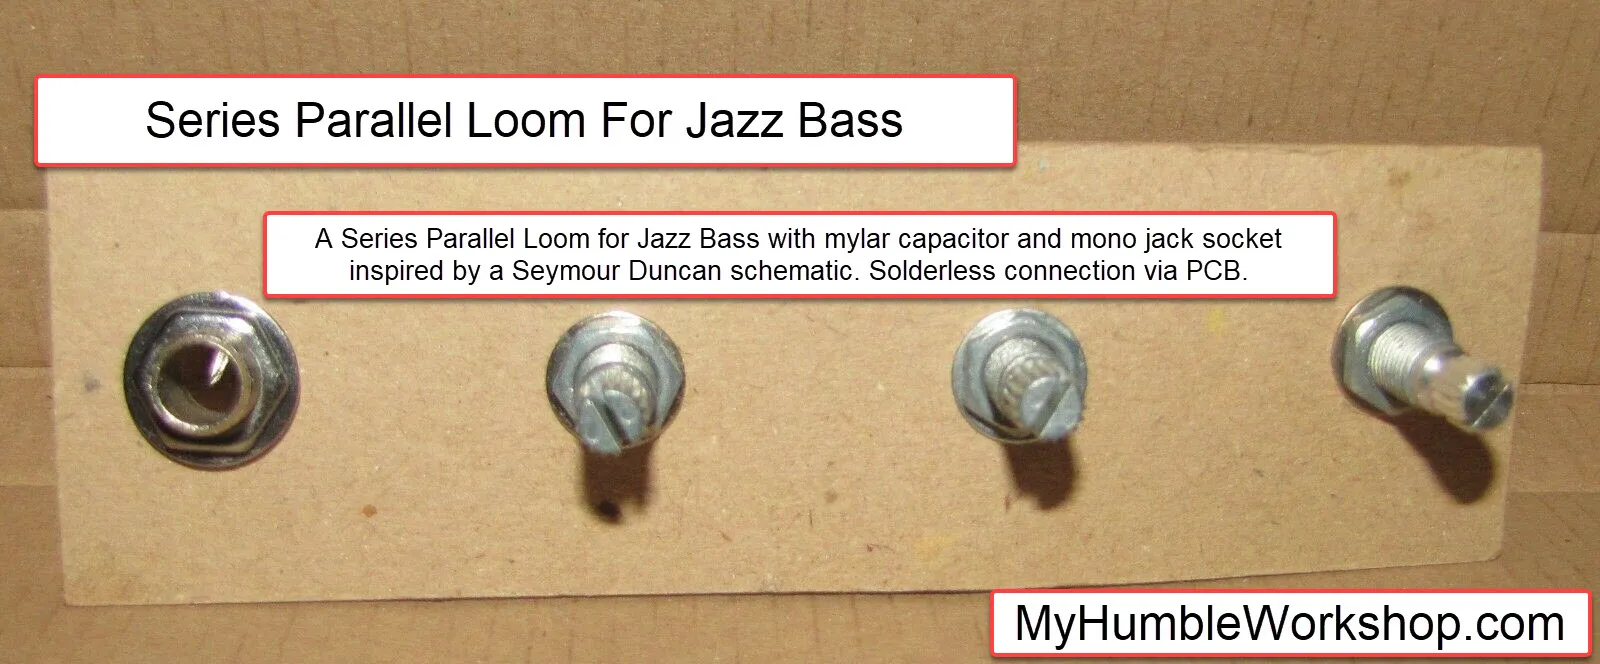 Series Parallel Loom for Jazz bass